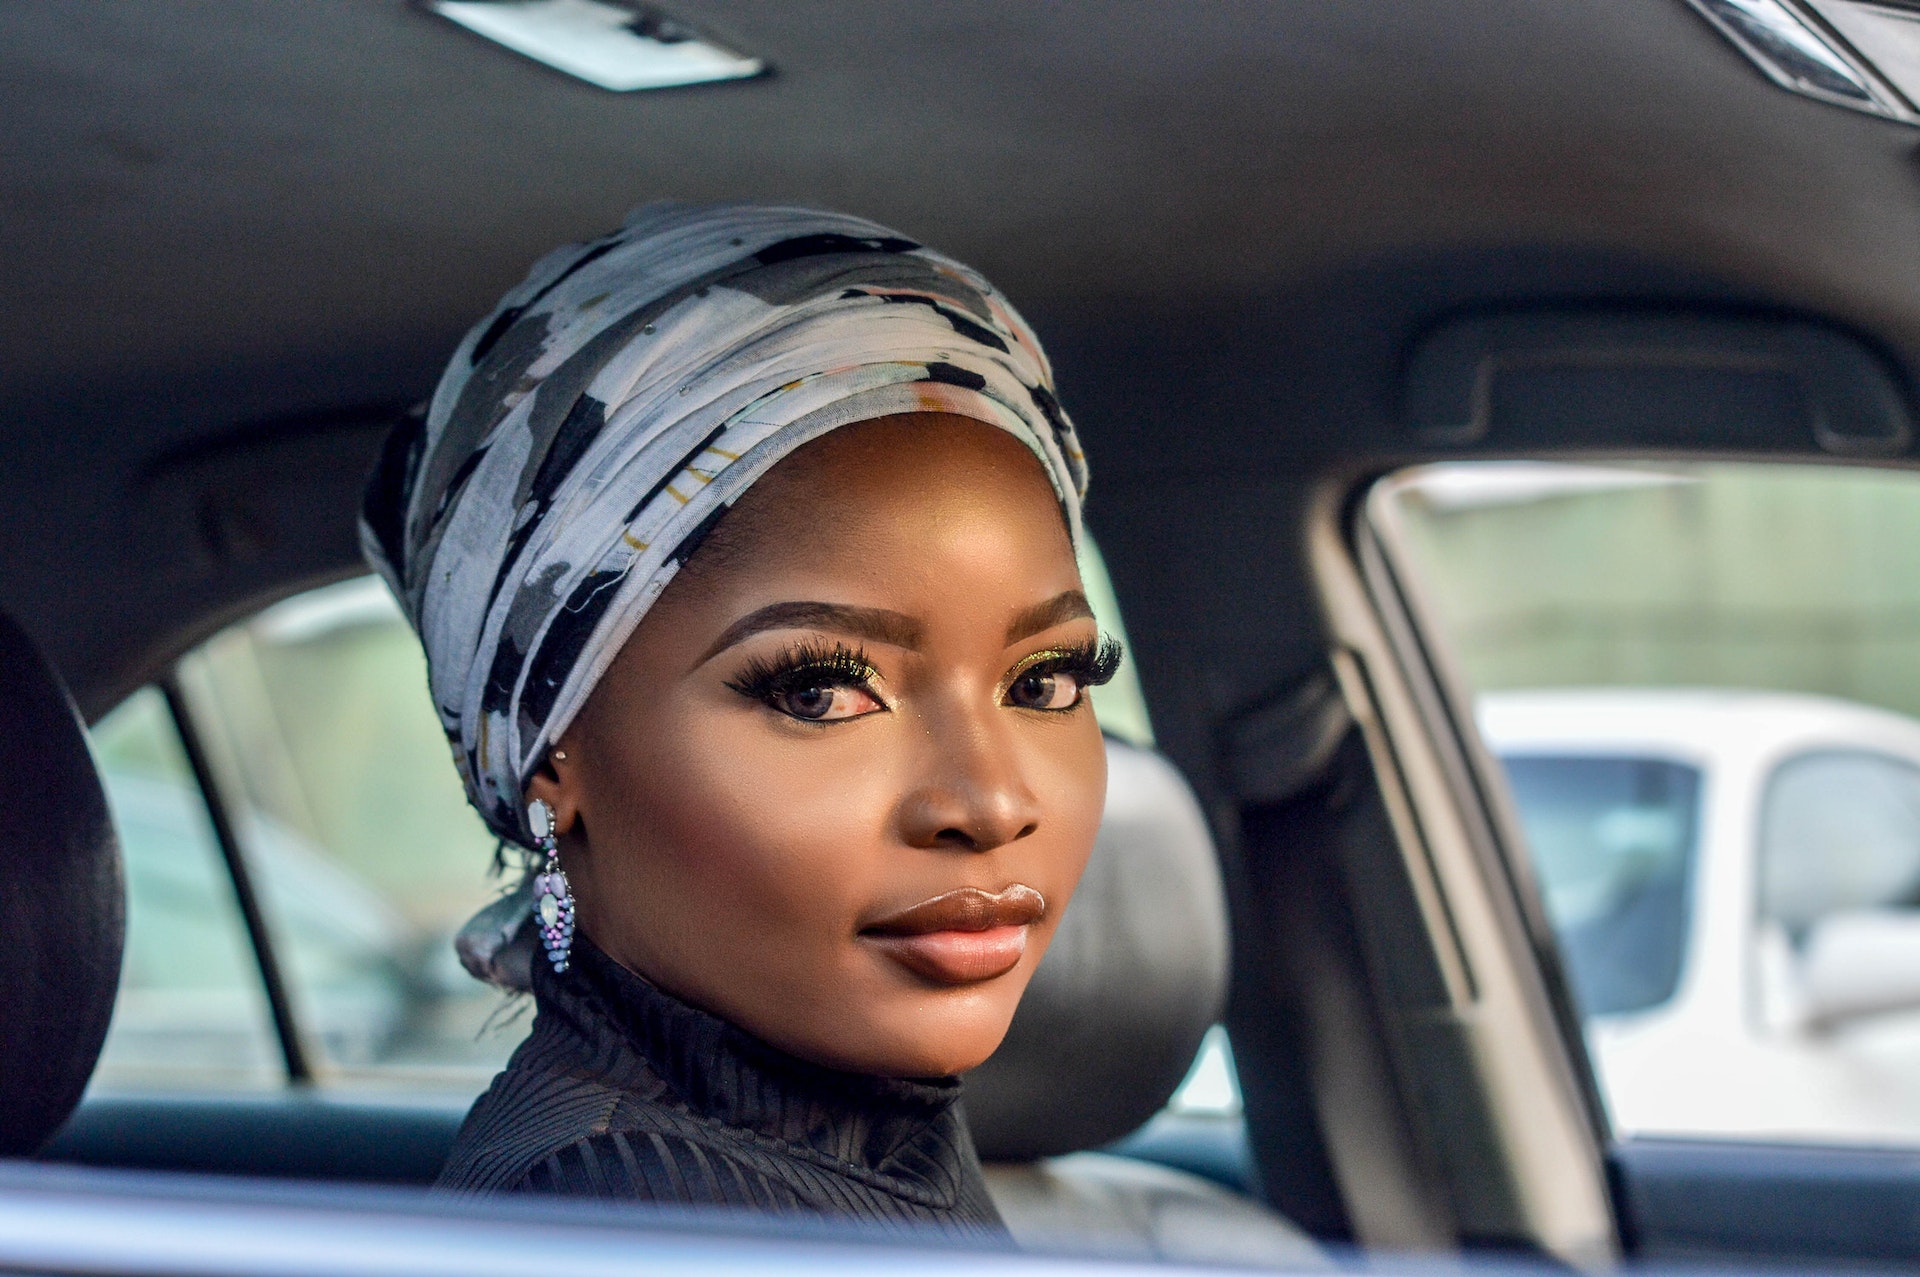 Photo of Woman Wearing White and Black Floral Headscarf Inside Car